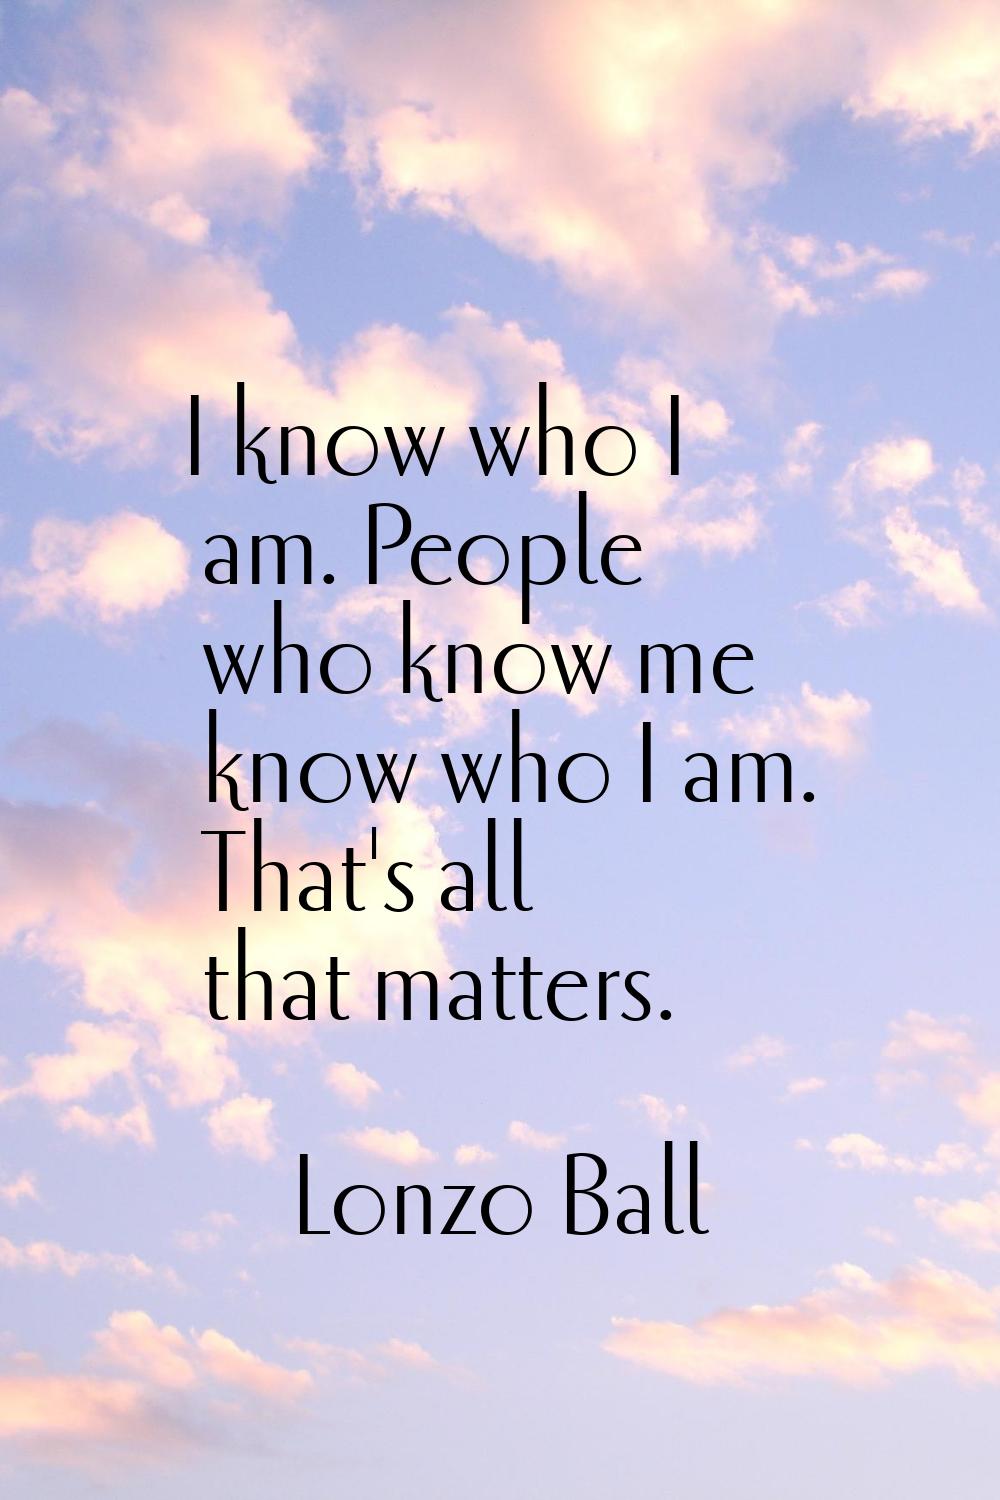 I know who I am. People who know me know who I am. That's all that matters.